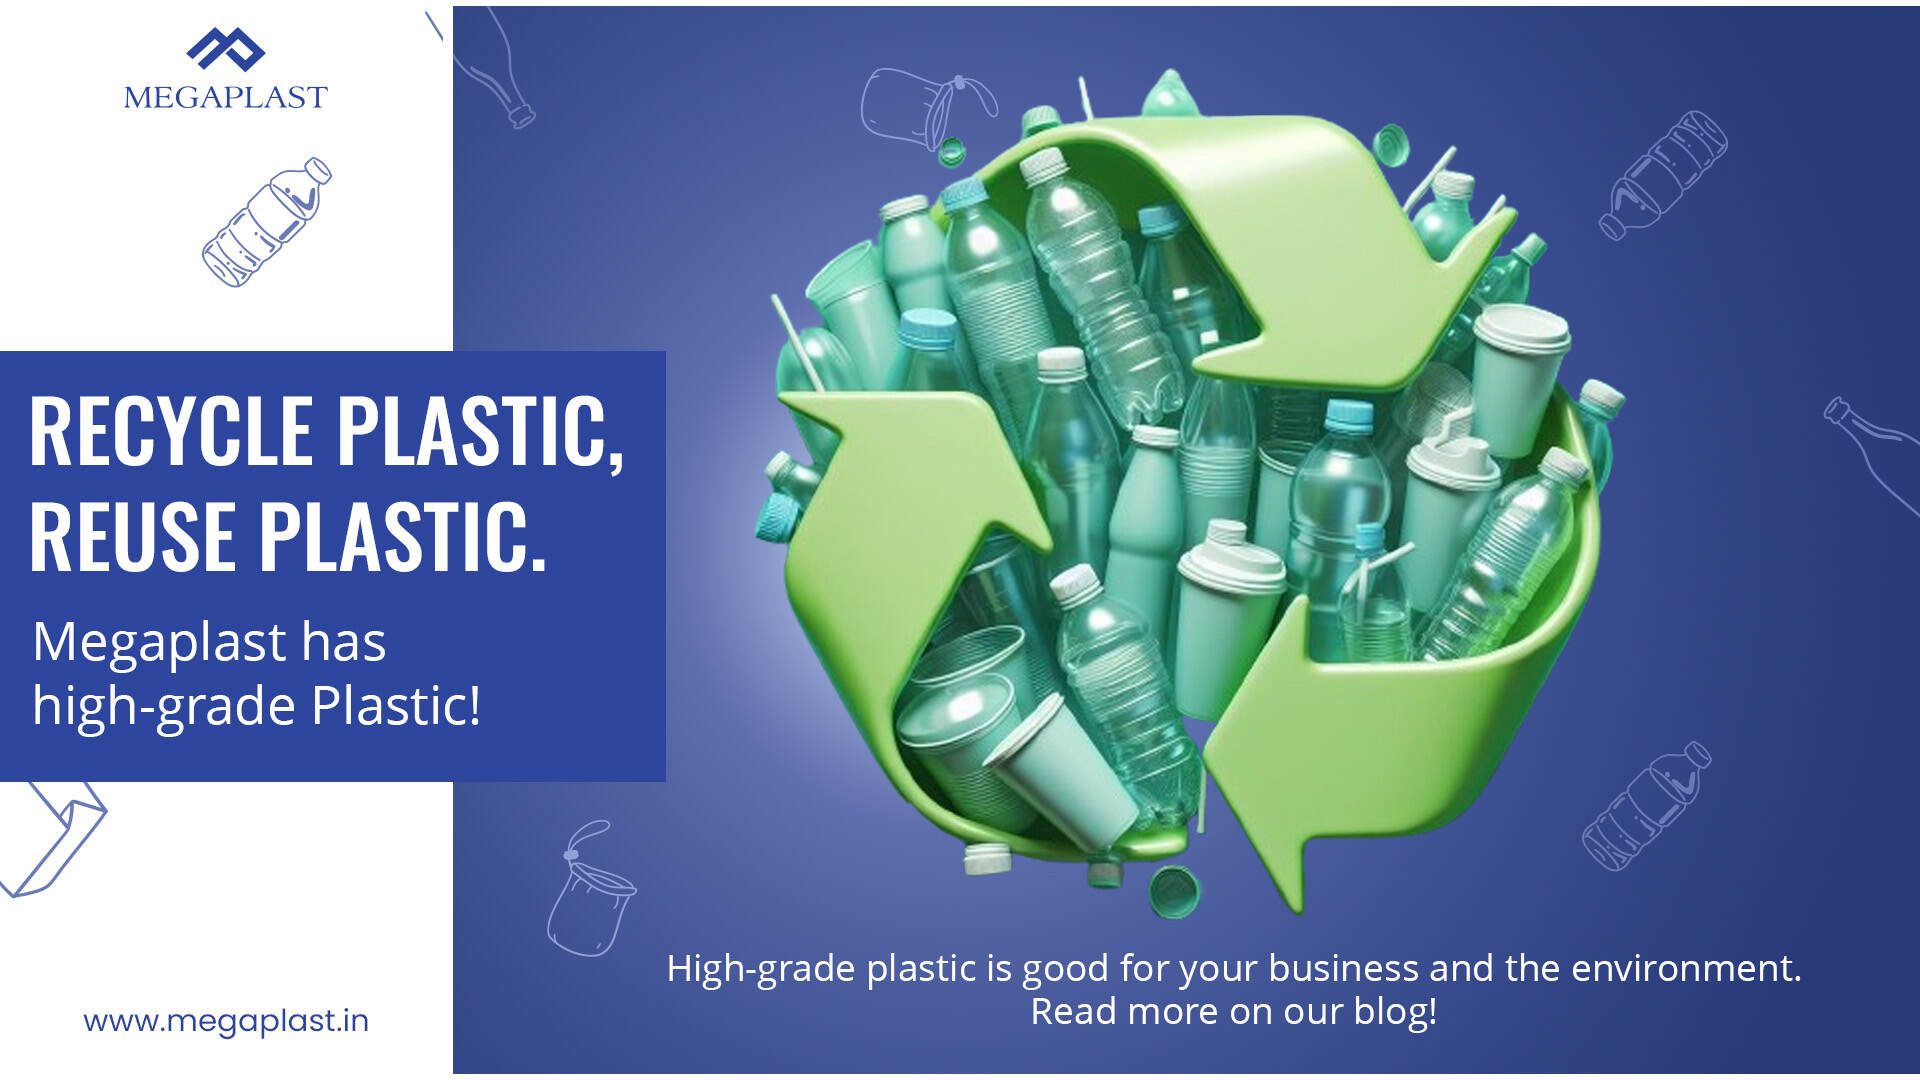 Why High-Grade Plastics Make All the Difference